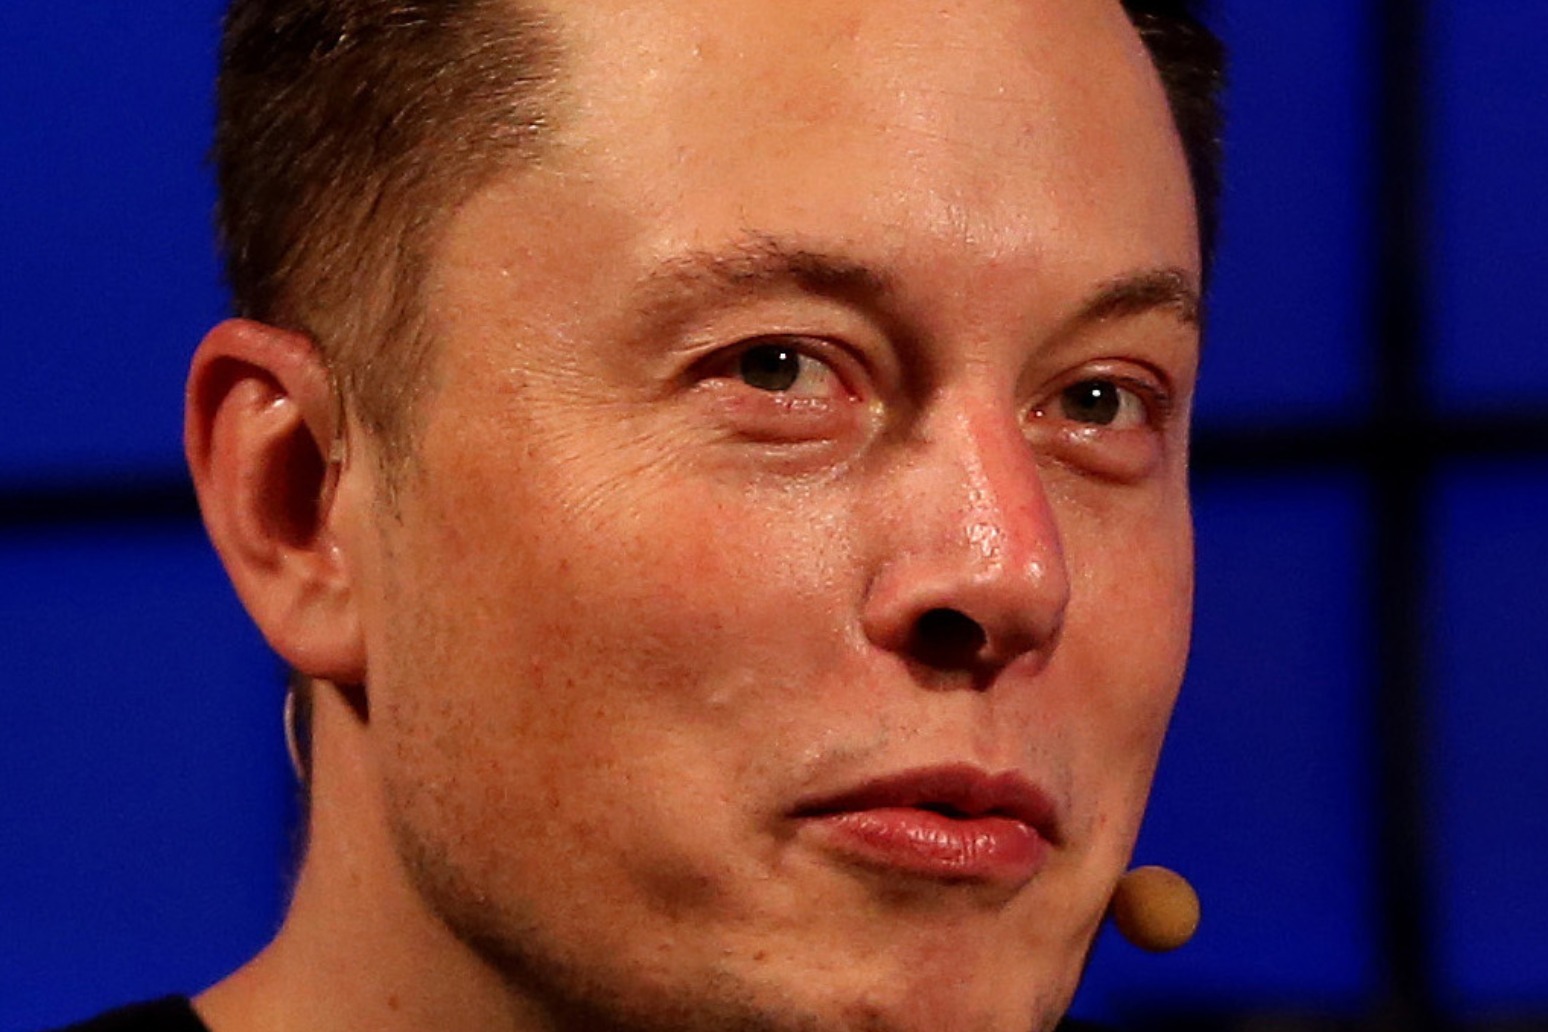 Elon Musk reaches agreement to acquire Twitter for about 44 billion dollars 